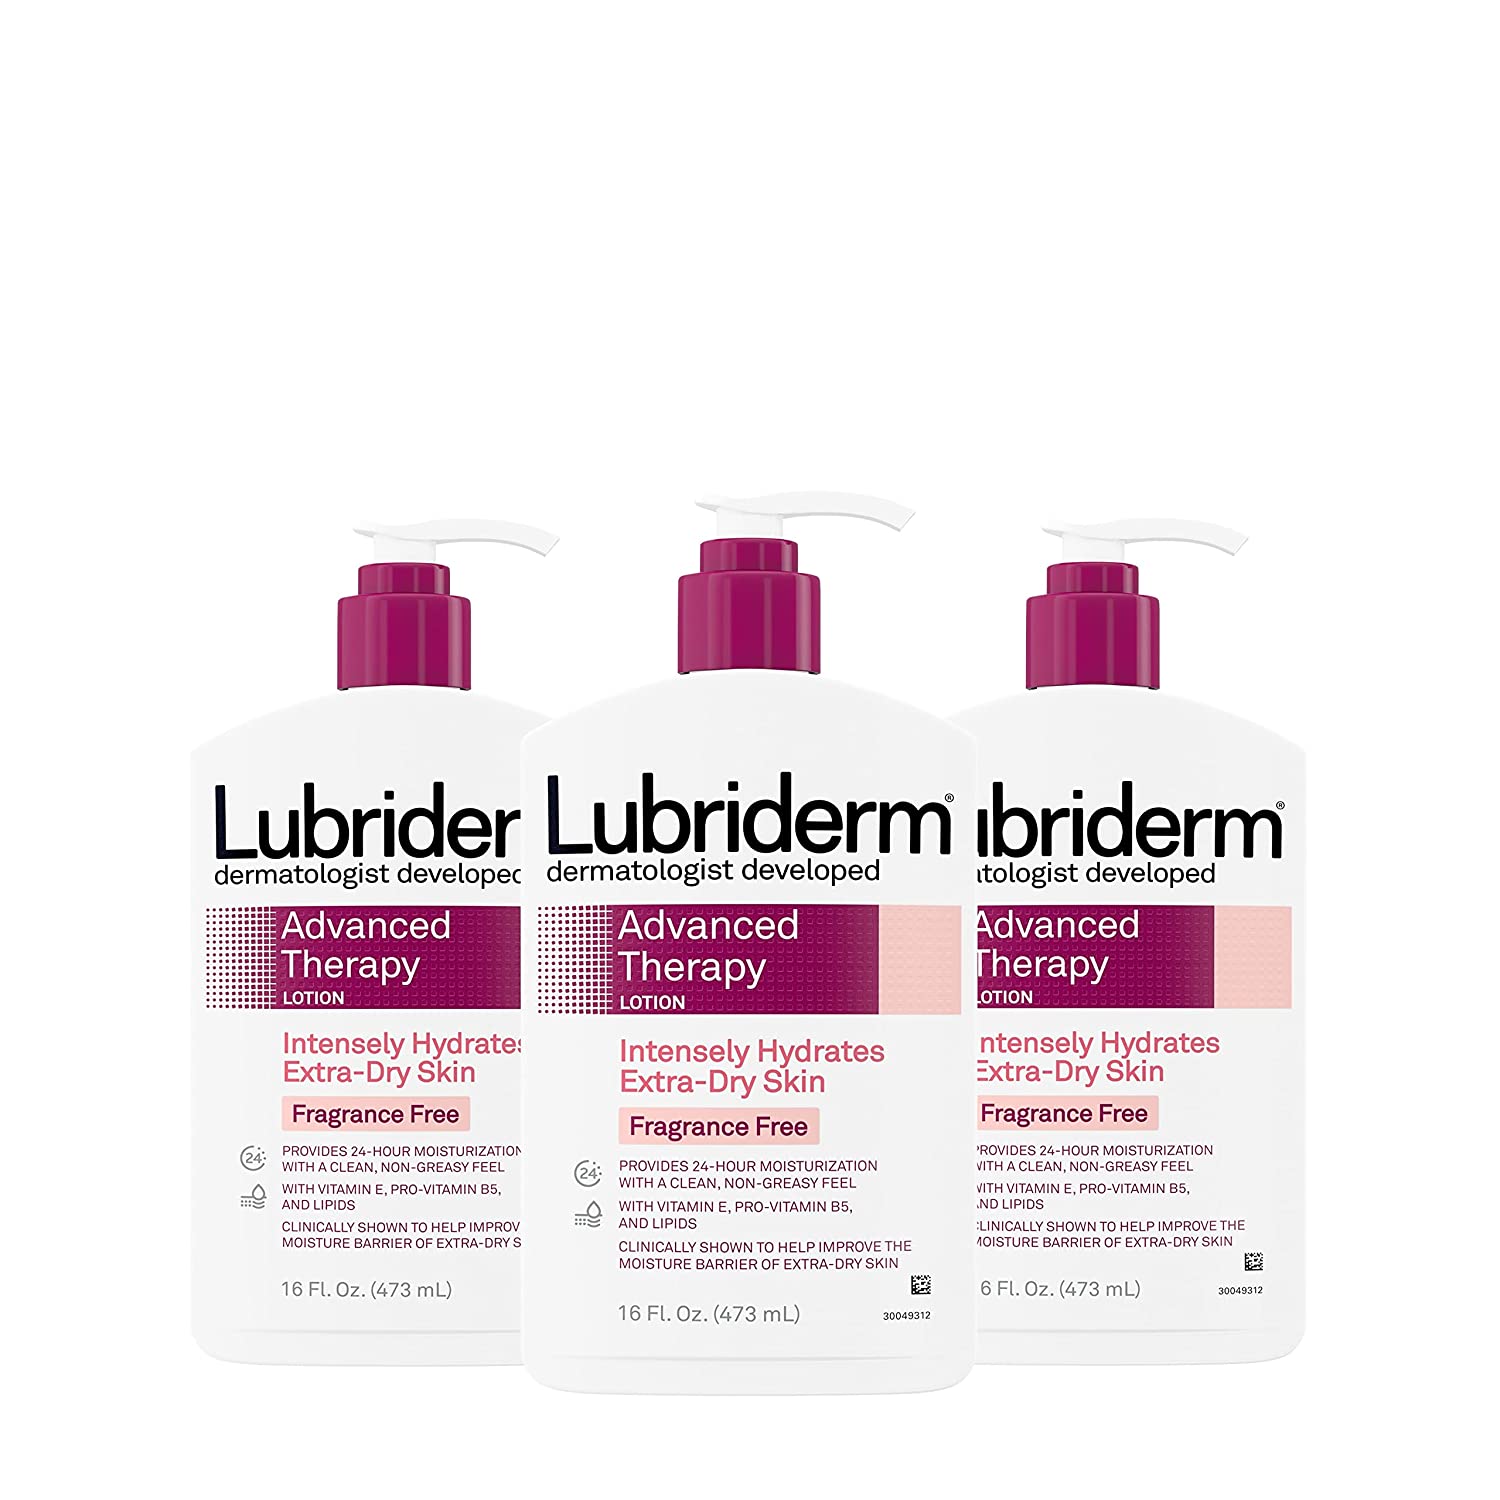 Lubriderm Advanced Therapy Fragrance Free Moisturizing Lotion with Vitamins E and Pro Vitamin B5 Intense Hydration for Extra Dry Skin